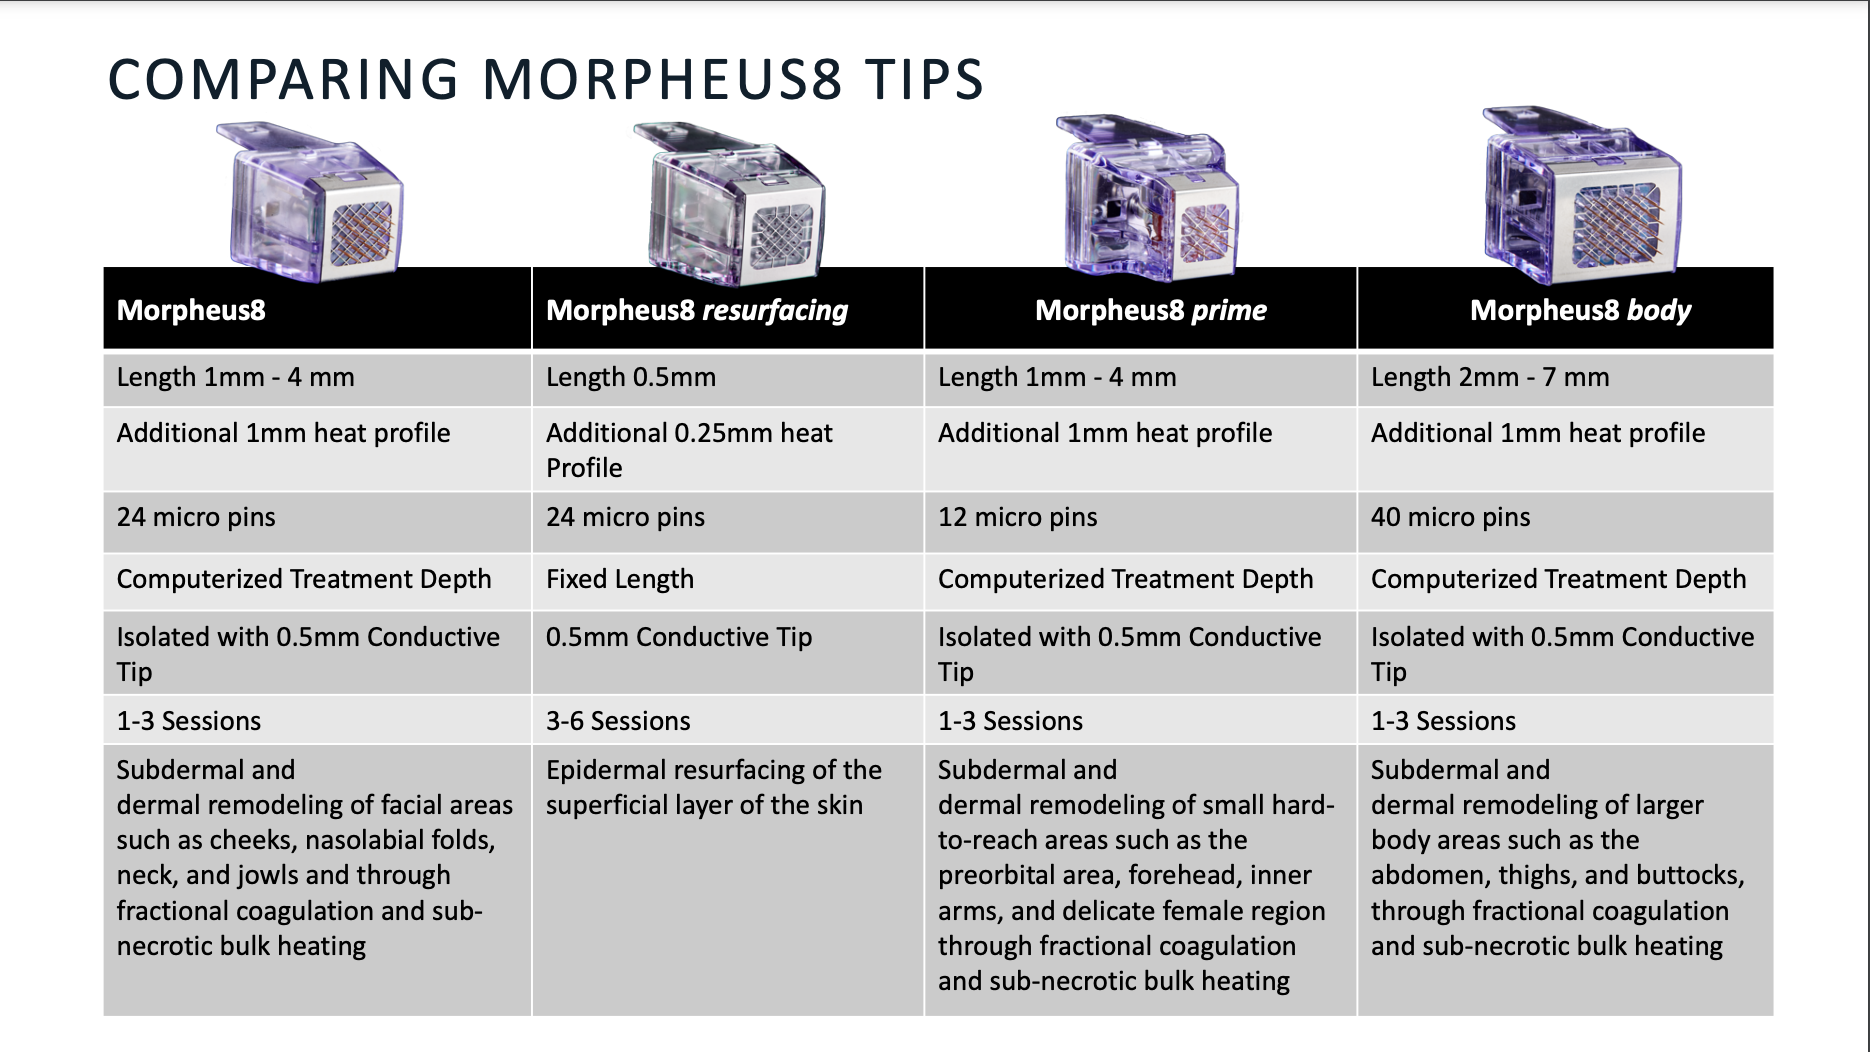 an image showing all the different morpheus8 tips